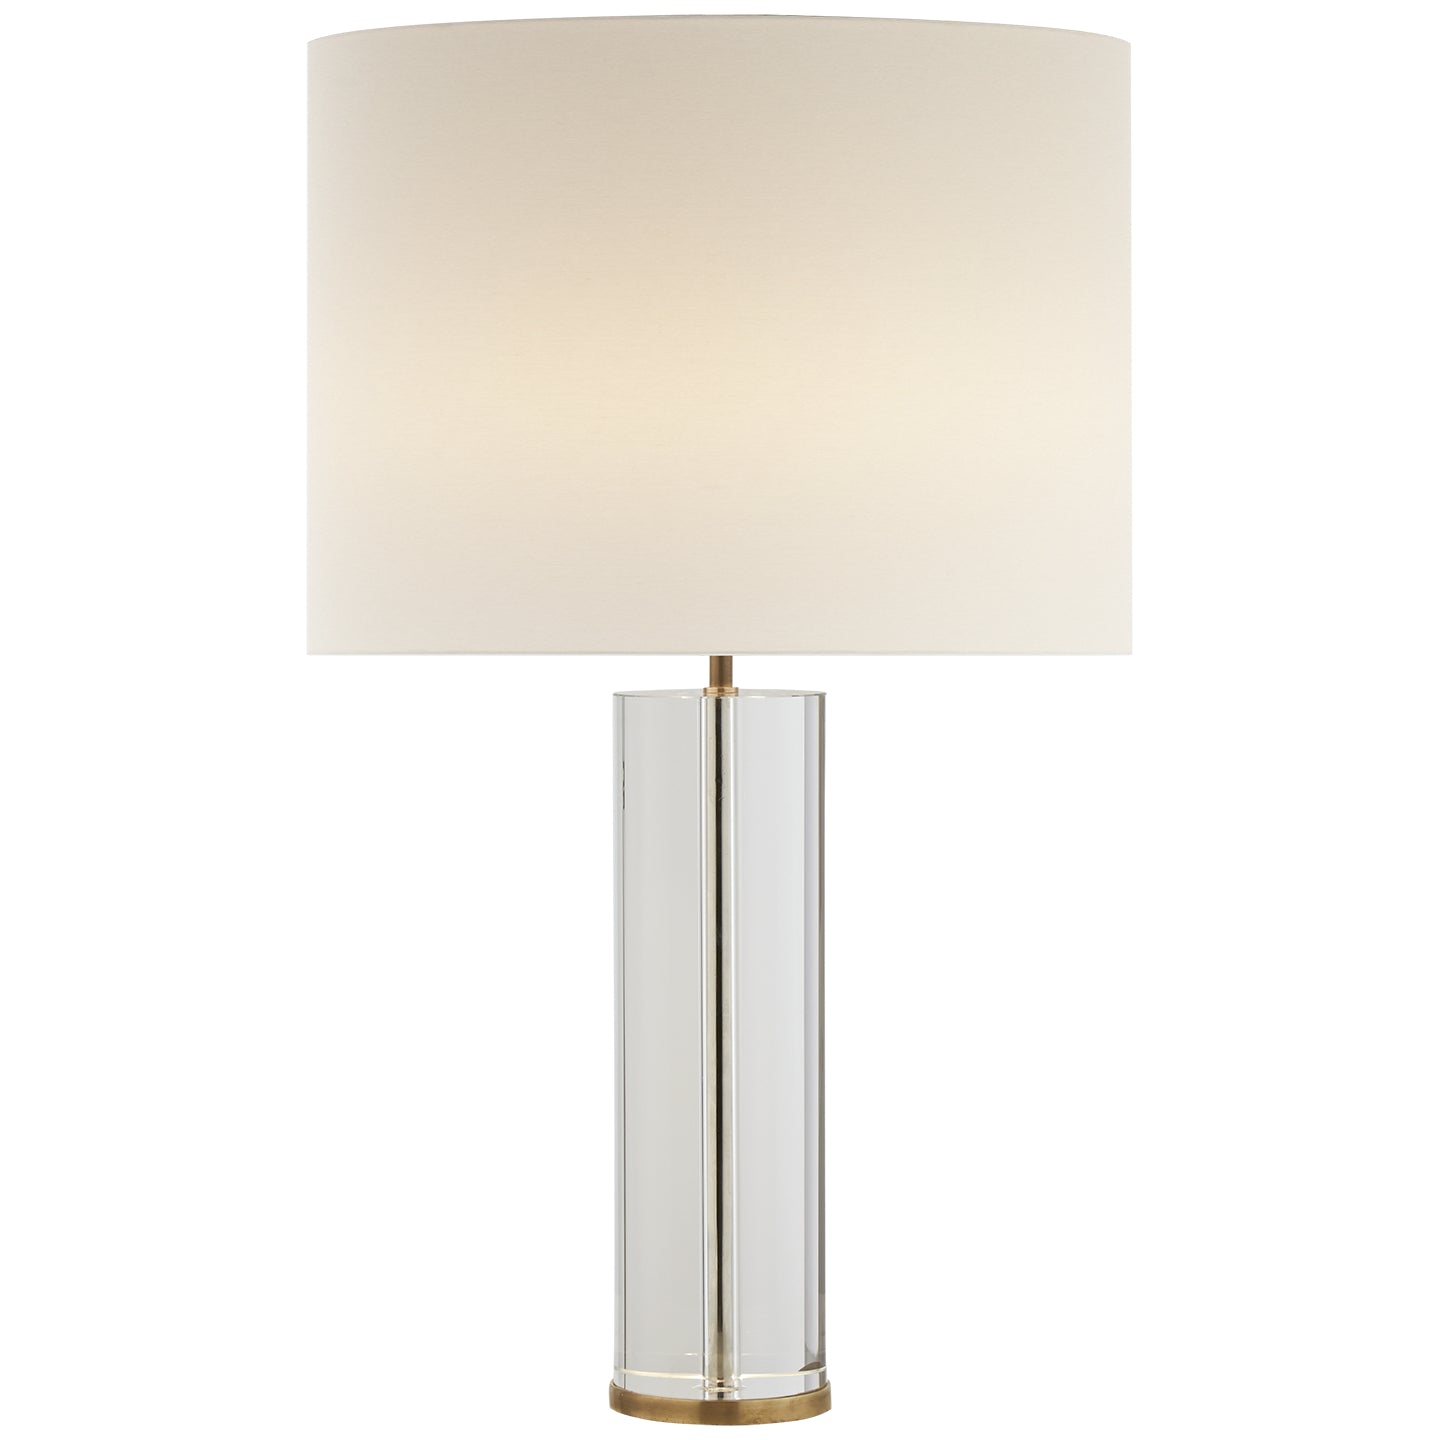 Visual Comfort Signature - ARN 3024CG/HAB-L - Two Light Table Lamp - Lineham - Crystal with Brass